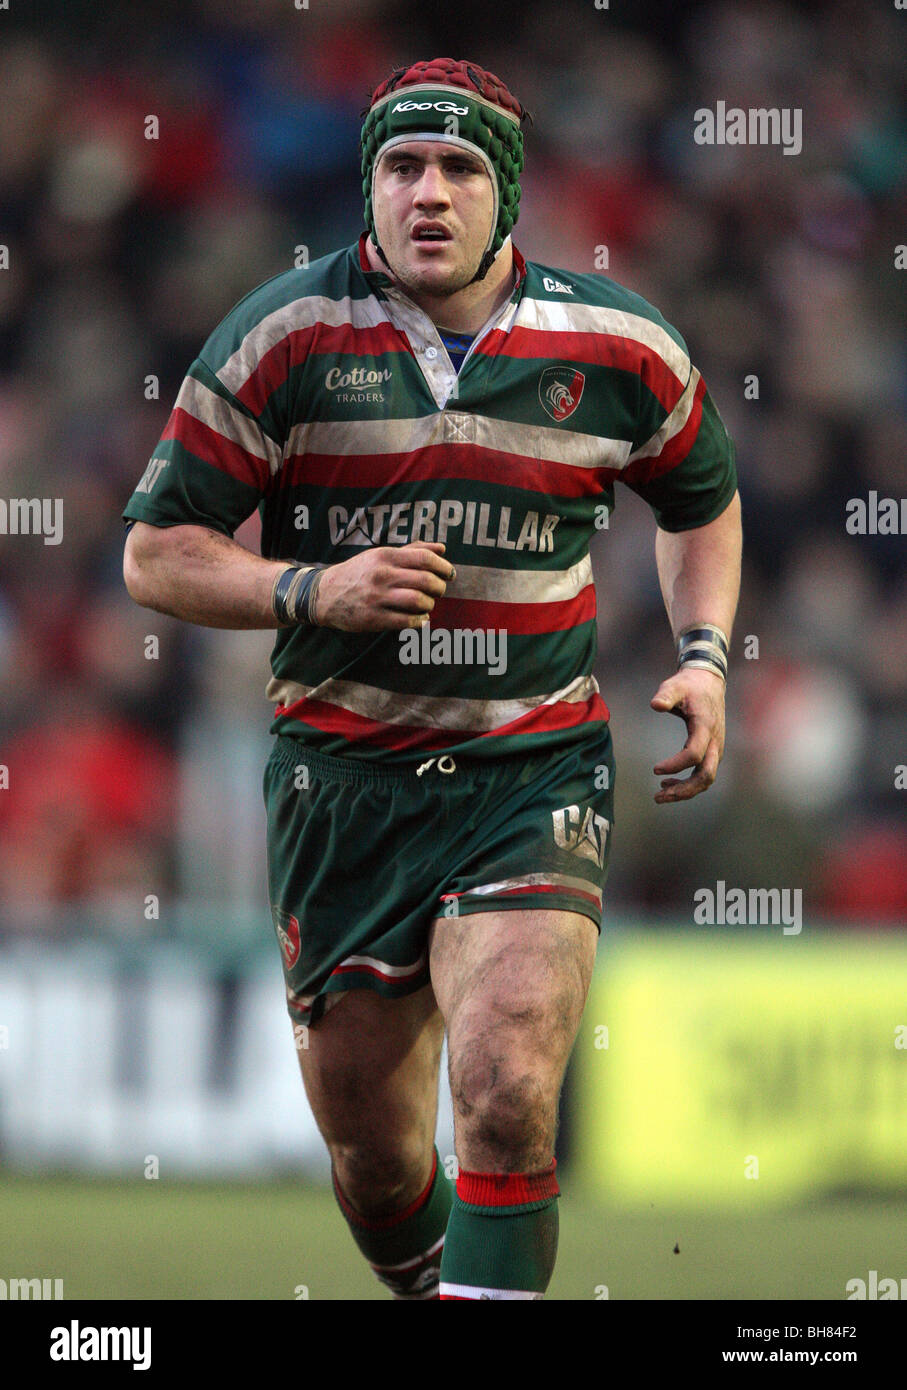 MARCOS AYERZA LEICESTER TIGER RUFC WELFORD ROAD LEICESTER ENGLAND 16.01.2010 Stockfoto